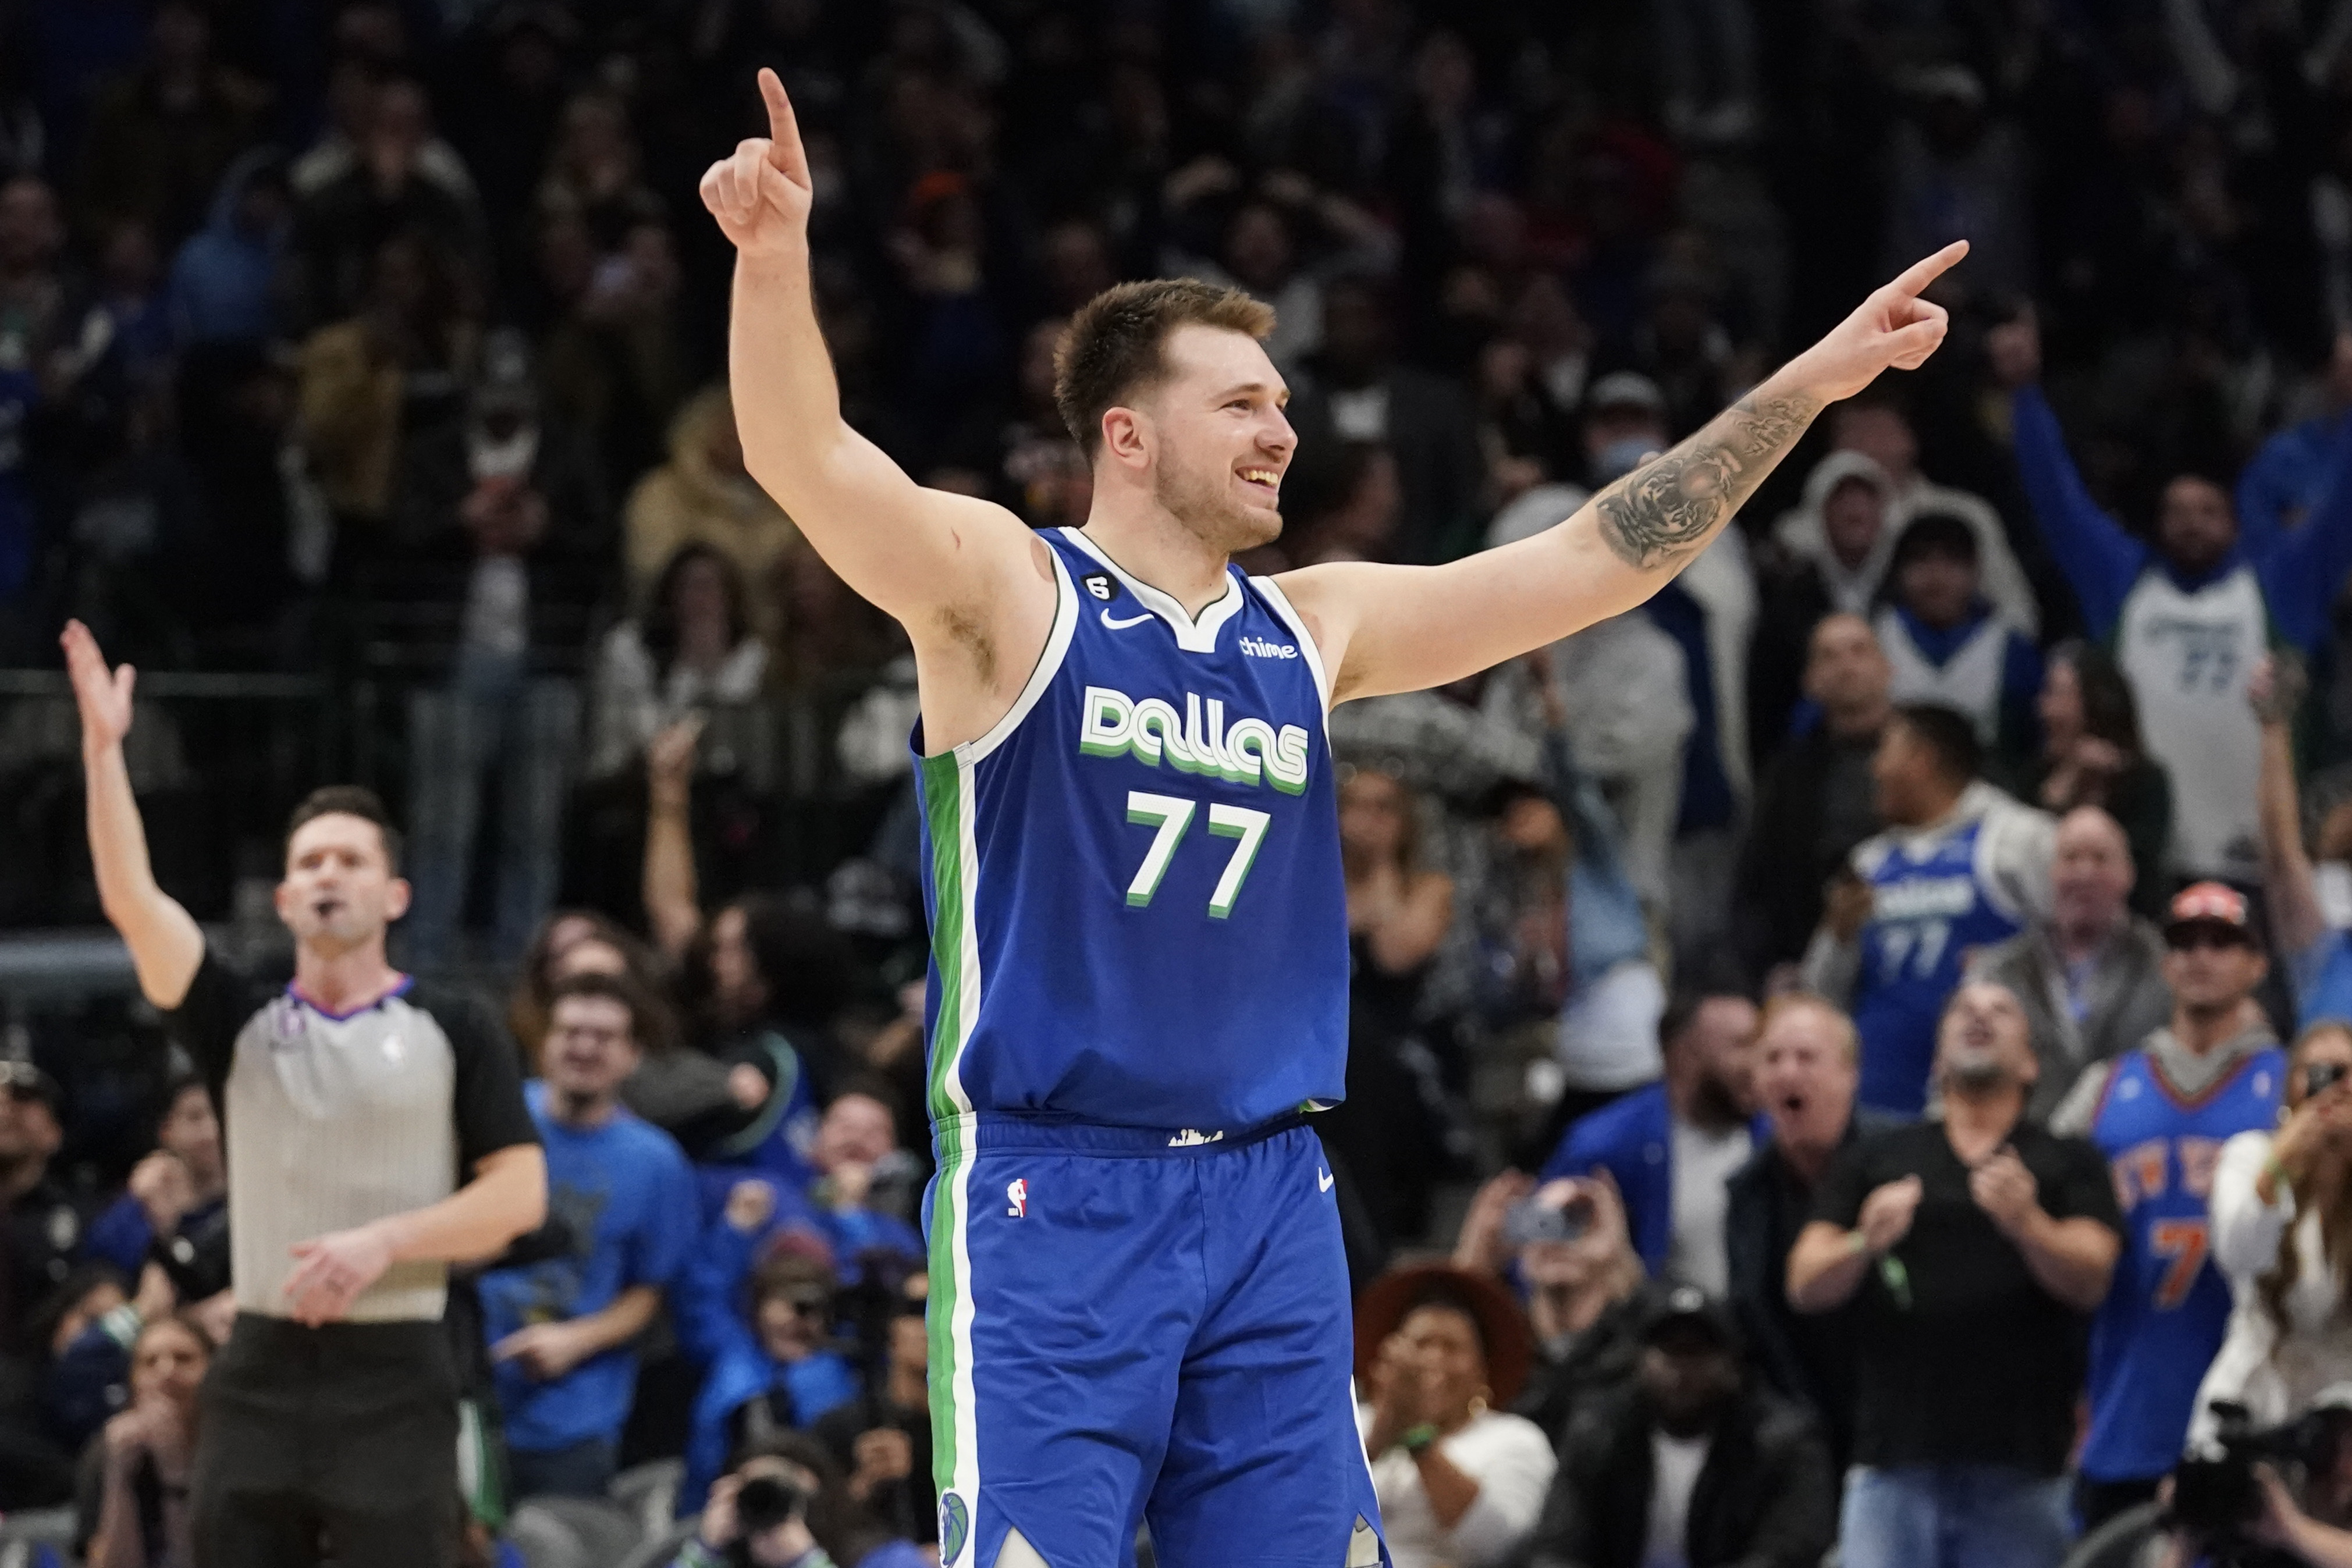 25-under-25: Can Luka Doncic lead the Mavs in the post-Dirk era?